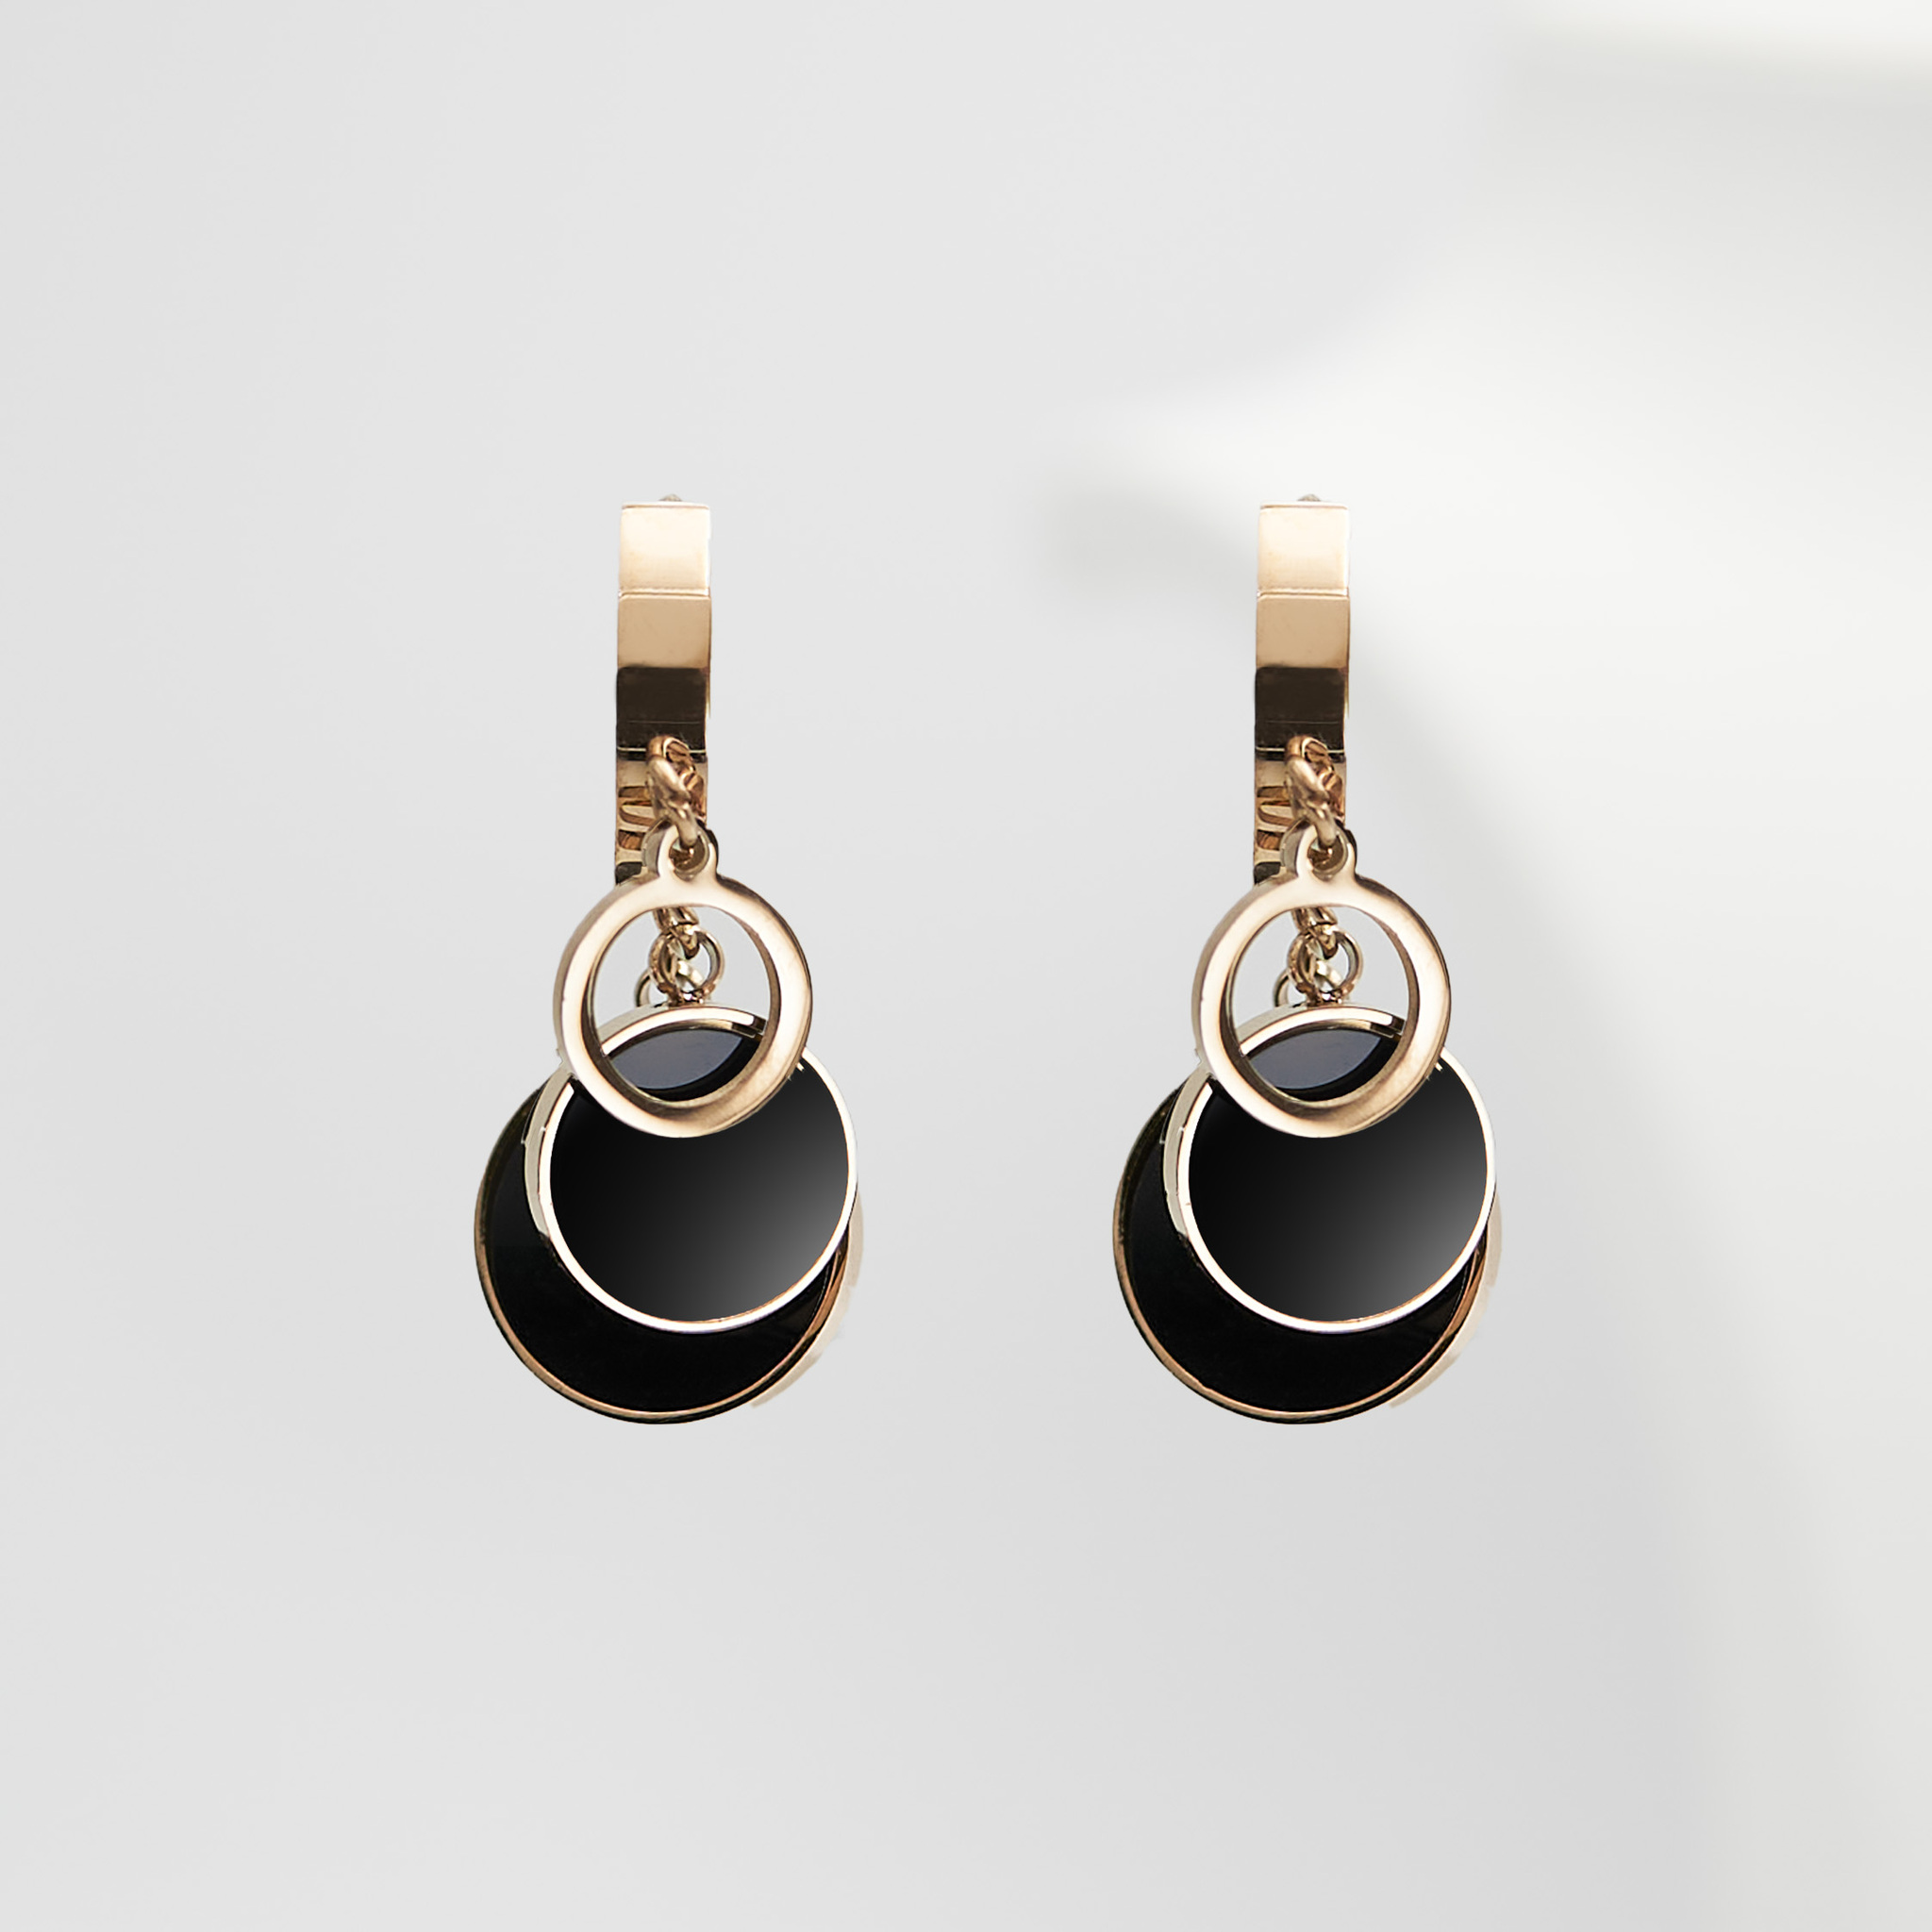 1- Eclipse Beauty Rose Gold Edition -Örhänge 316 L - Special Earrings From SWEVALI